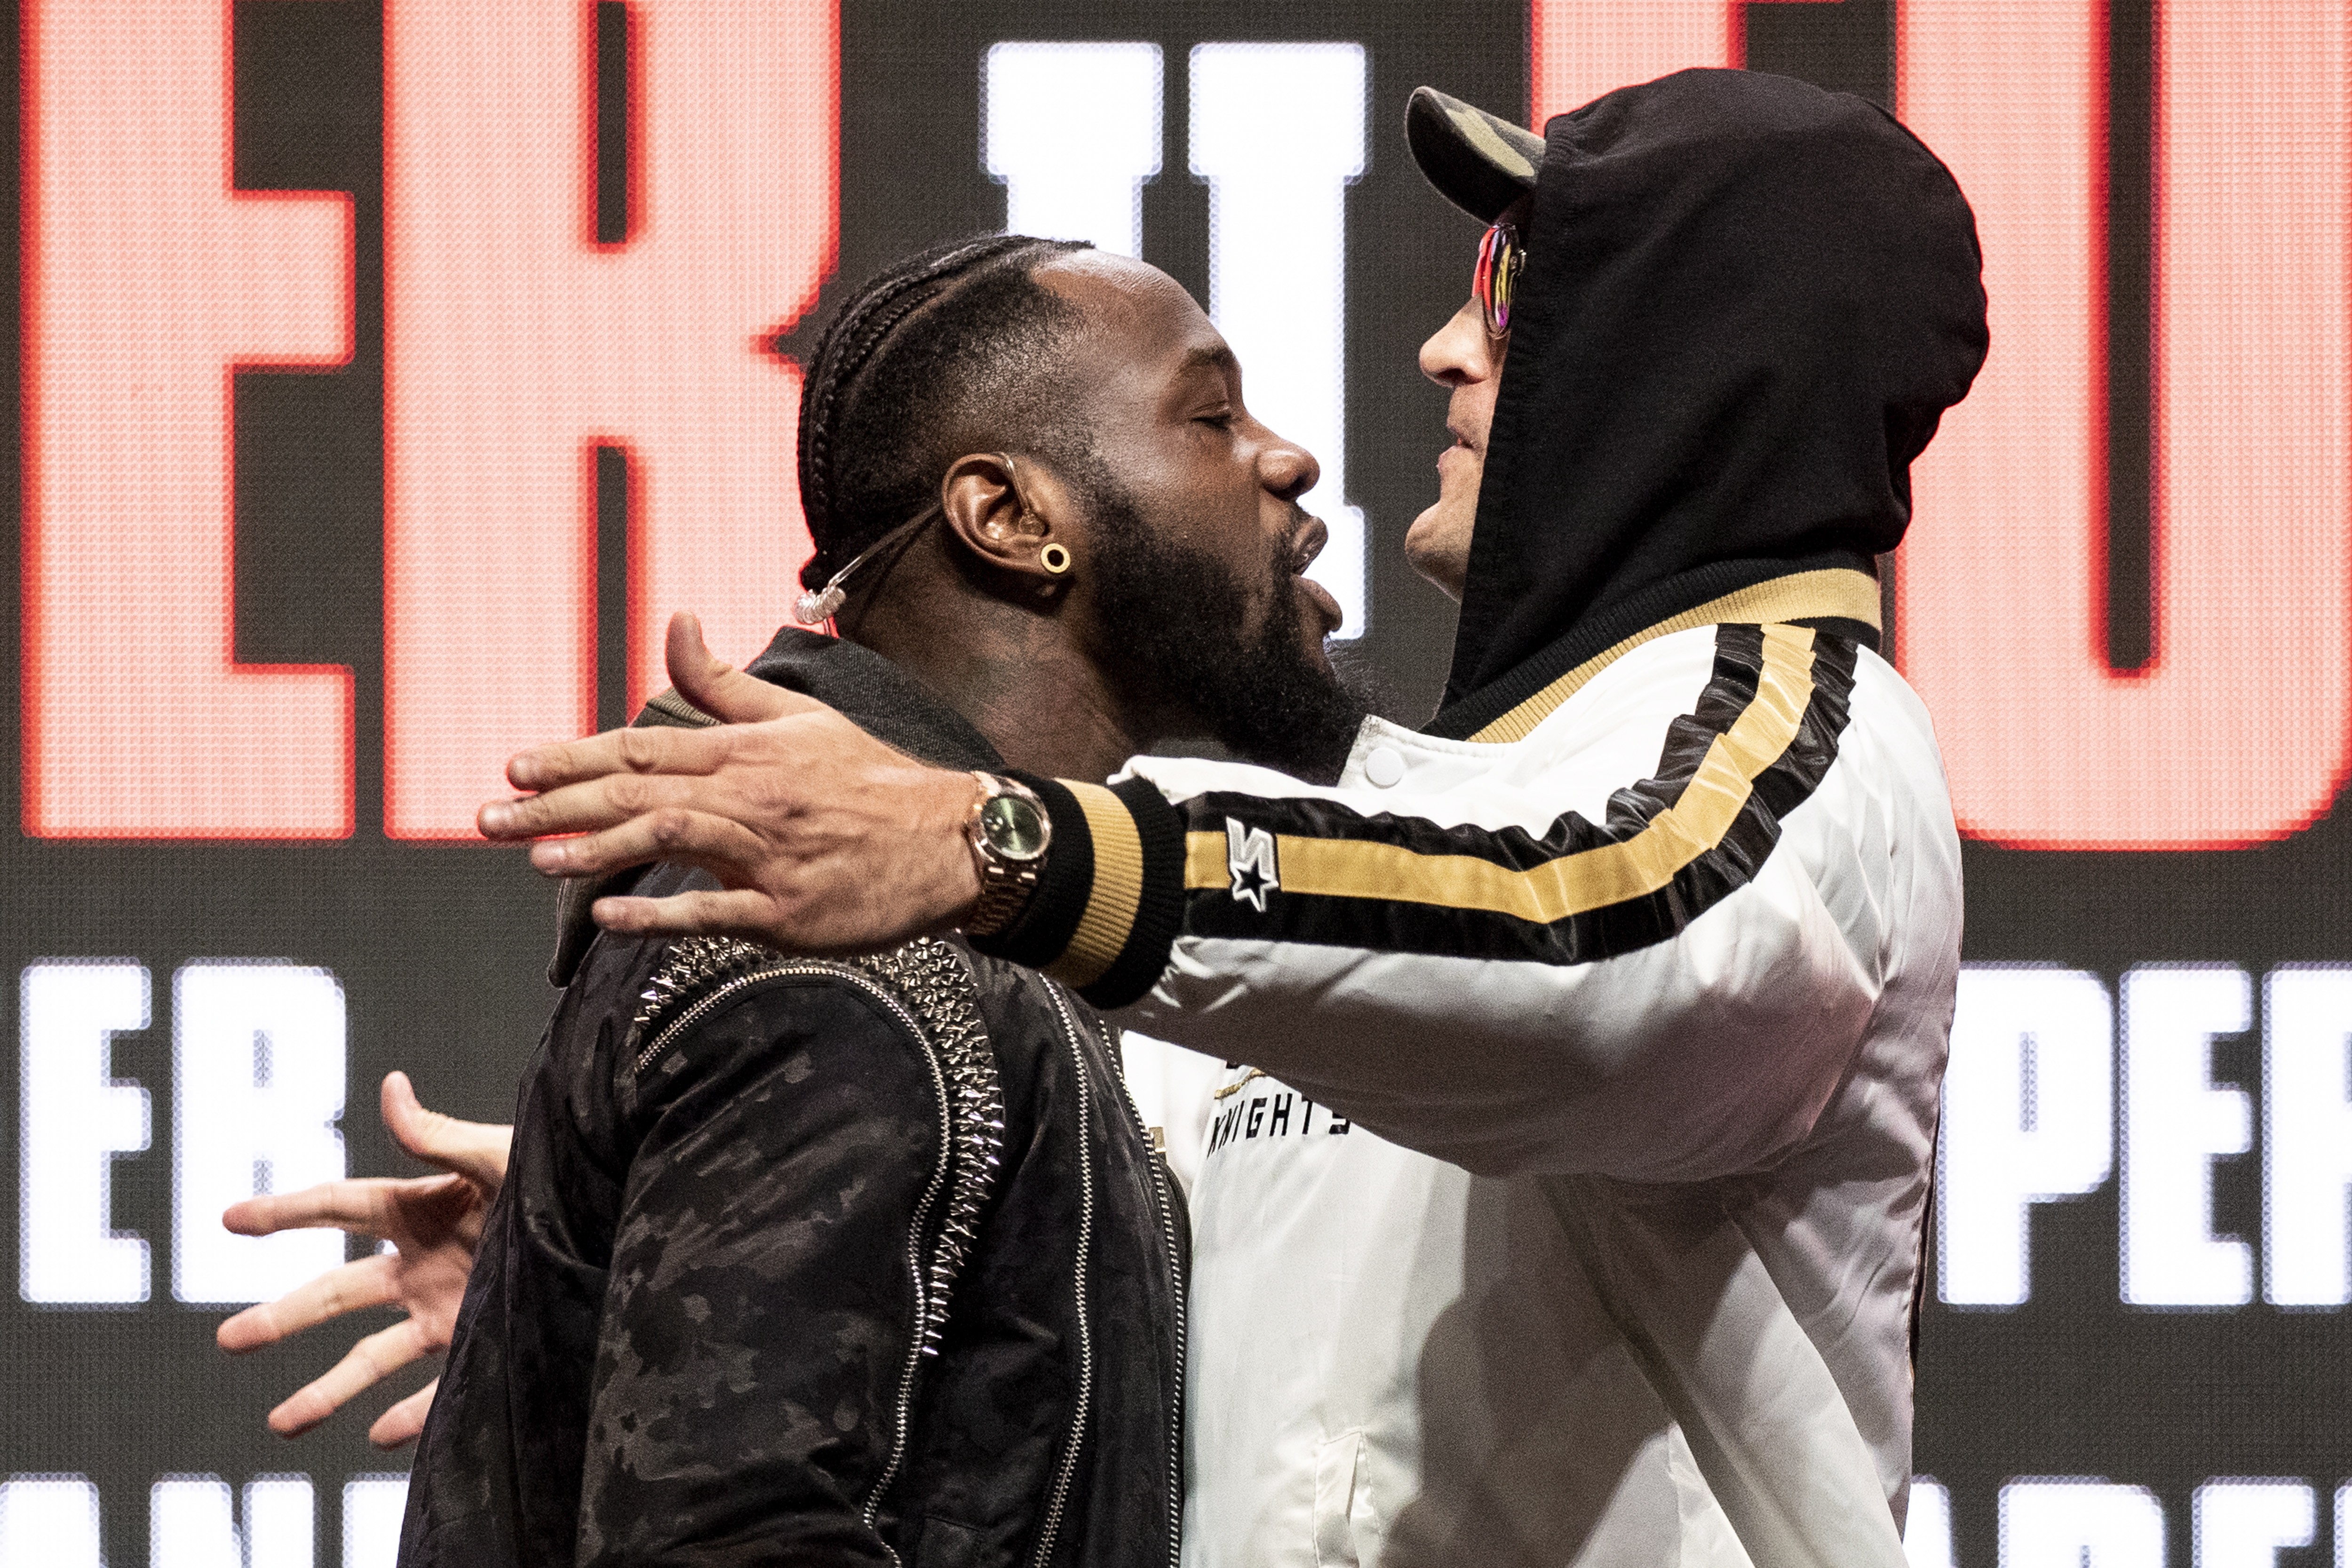 Deontay Wilder (left) and Tyson Fury face off on stage during a press conference before their rematch for the WBC heavyweight world championship at the Garden Arena in Las Vegas, Nevada. Photo: EPA